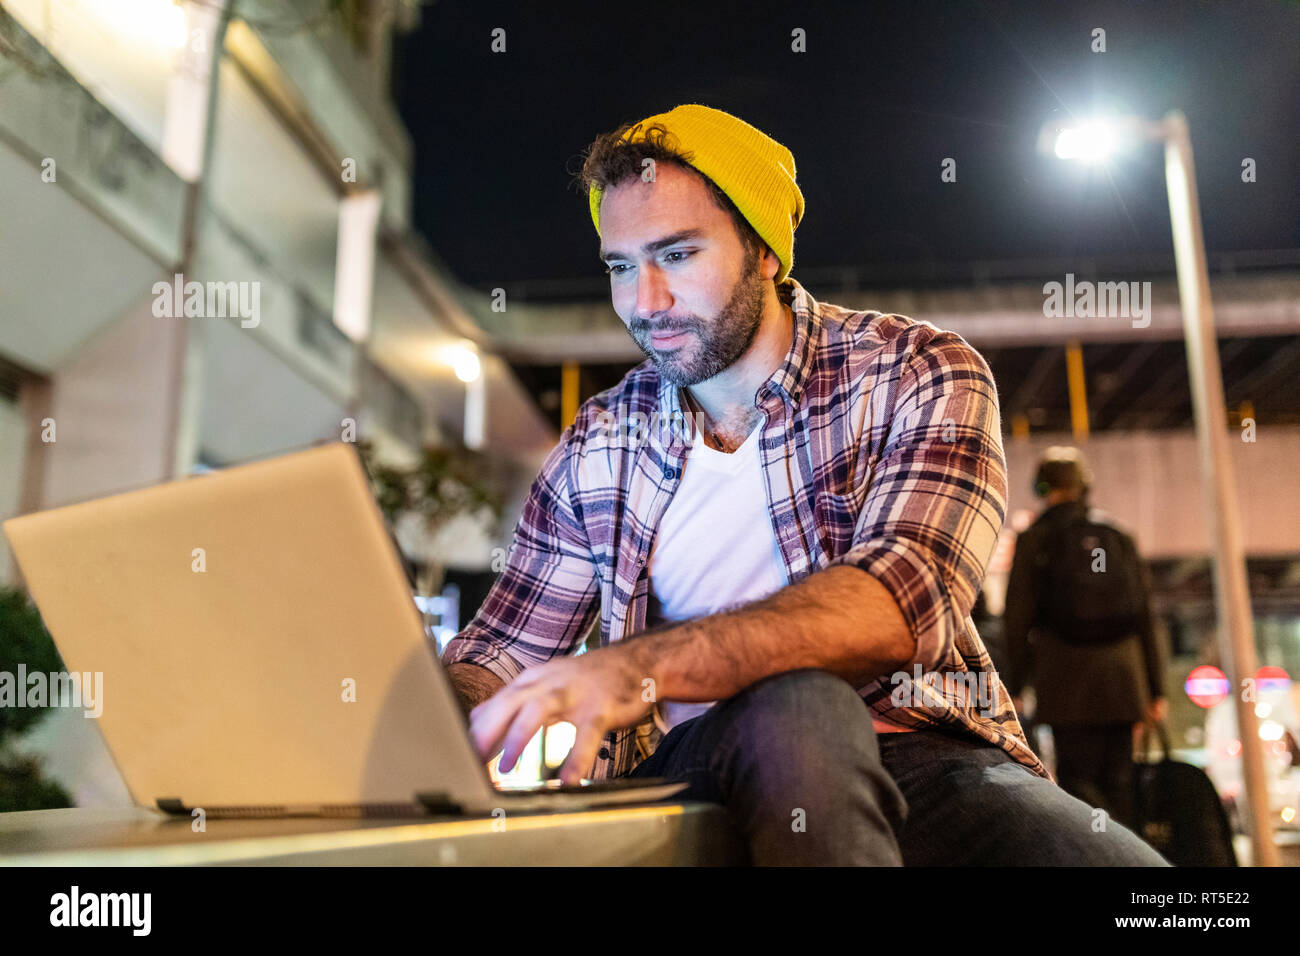 UK, London, smiling man using laptop out in the city at night Stock Photo